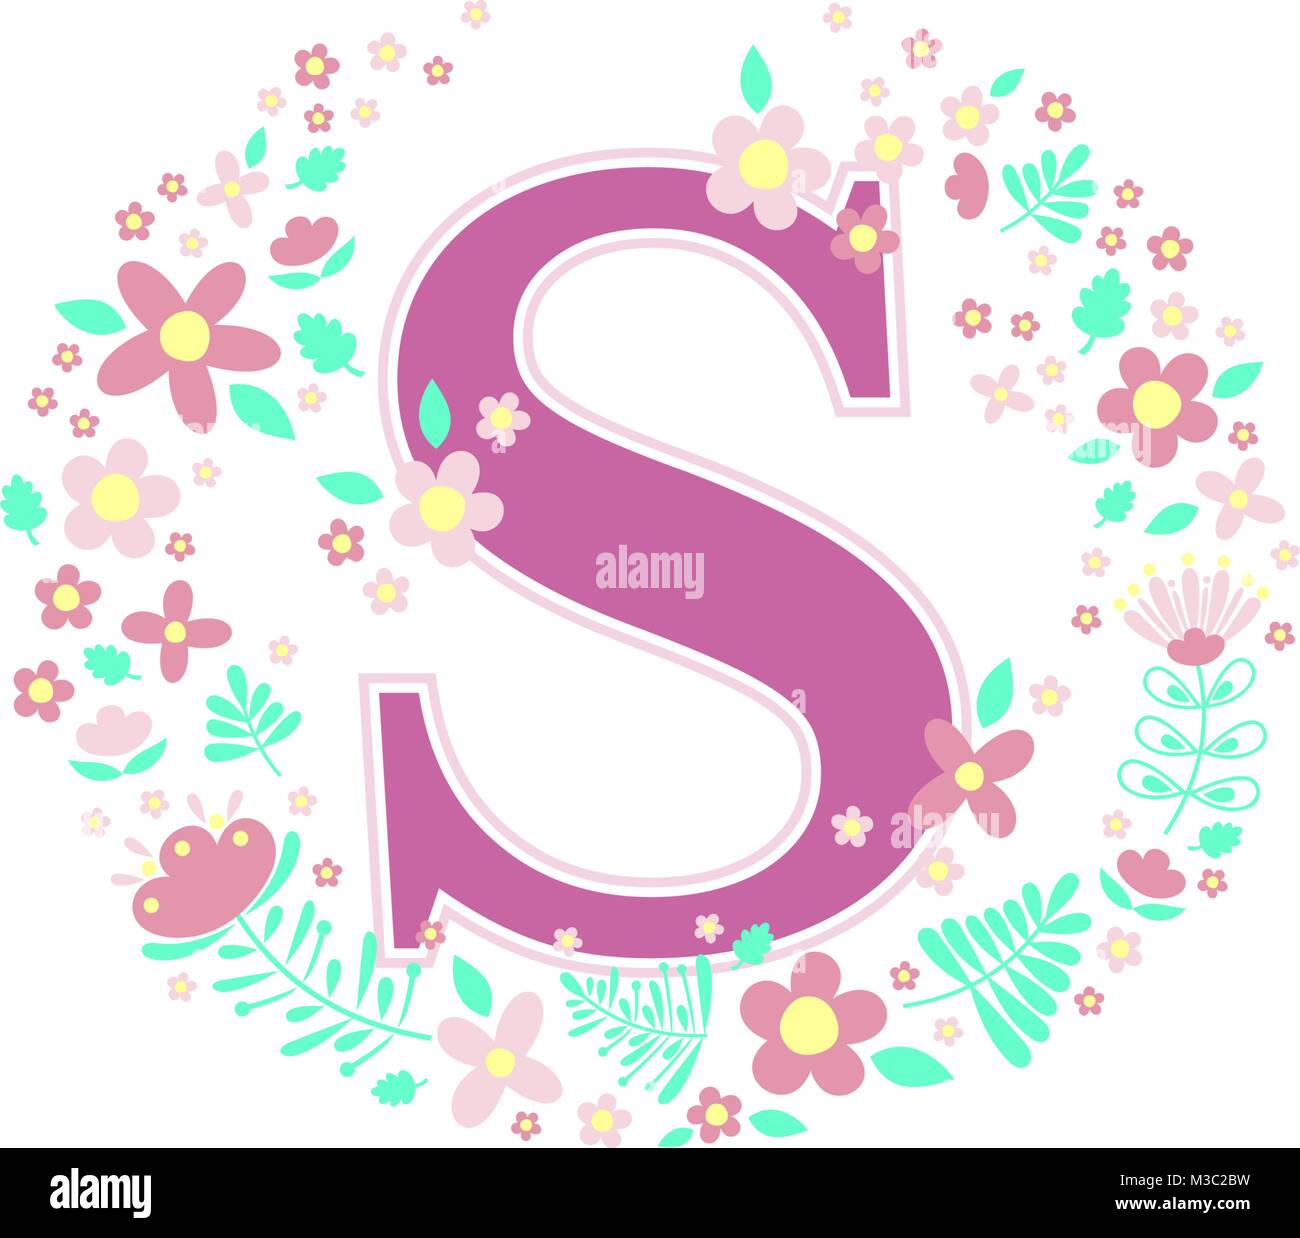 initial letter s with decorative flowers and design elements isolated on white background. can be used for baby name, nursery decoration, spring theme Stock Vector